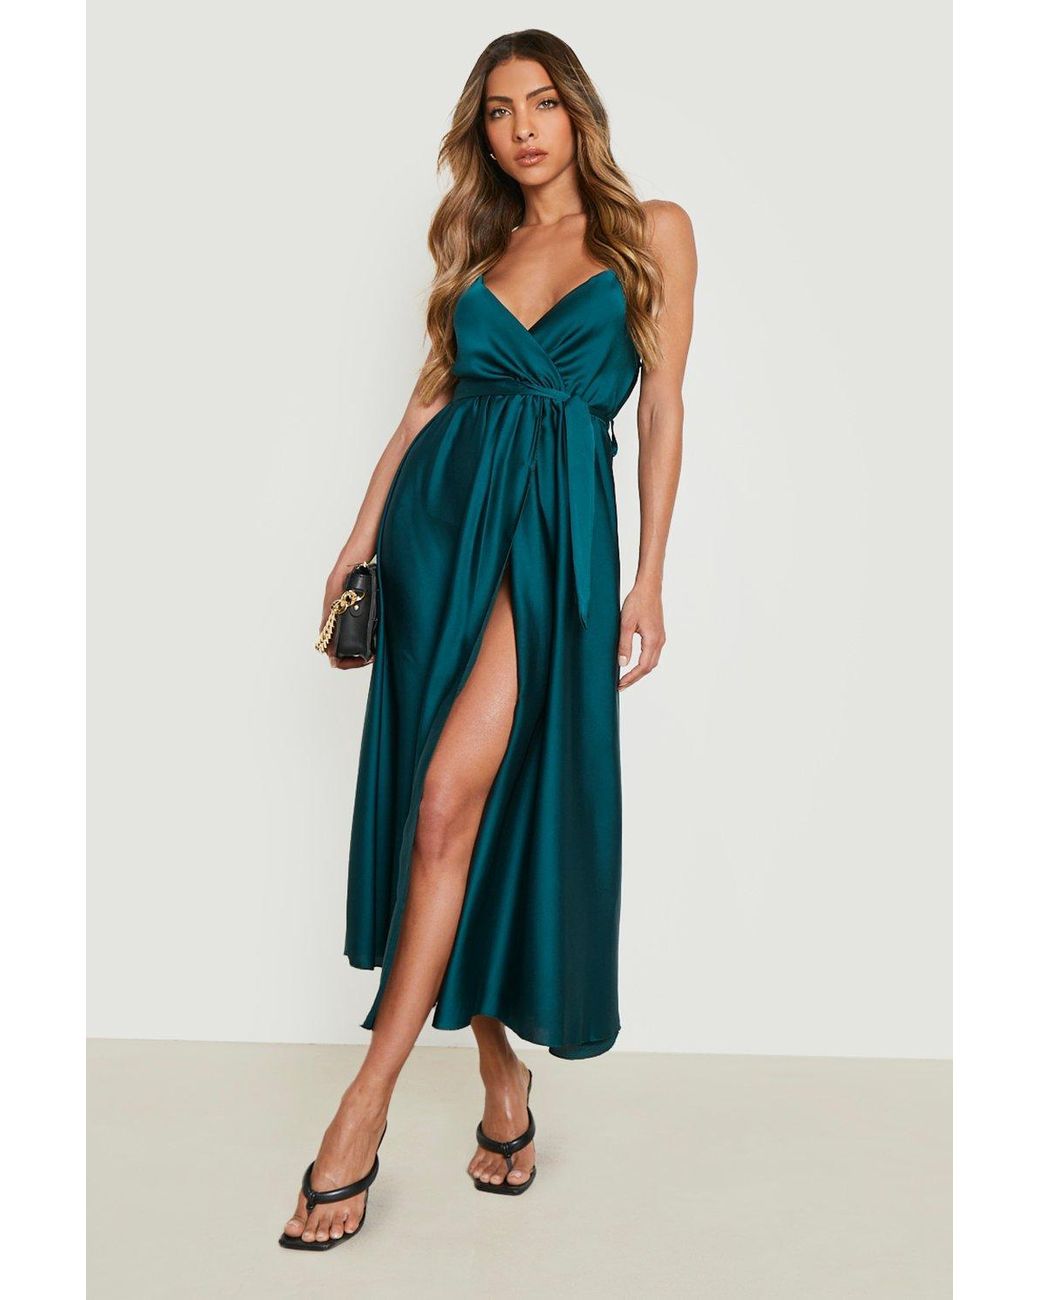 Boohoo Satin Wrap Self Belted Maxi Dress in Green | Lyst